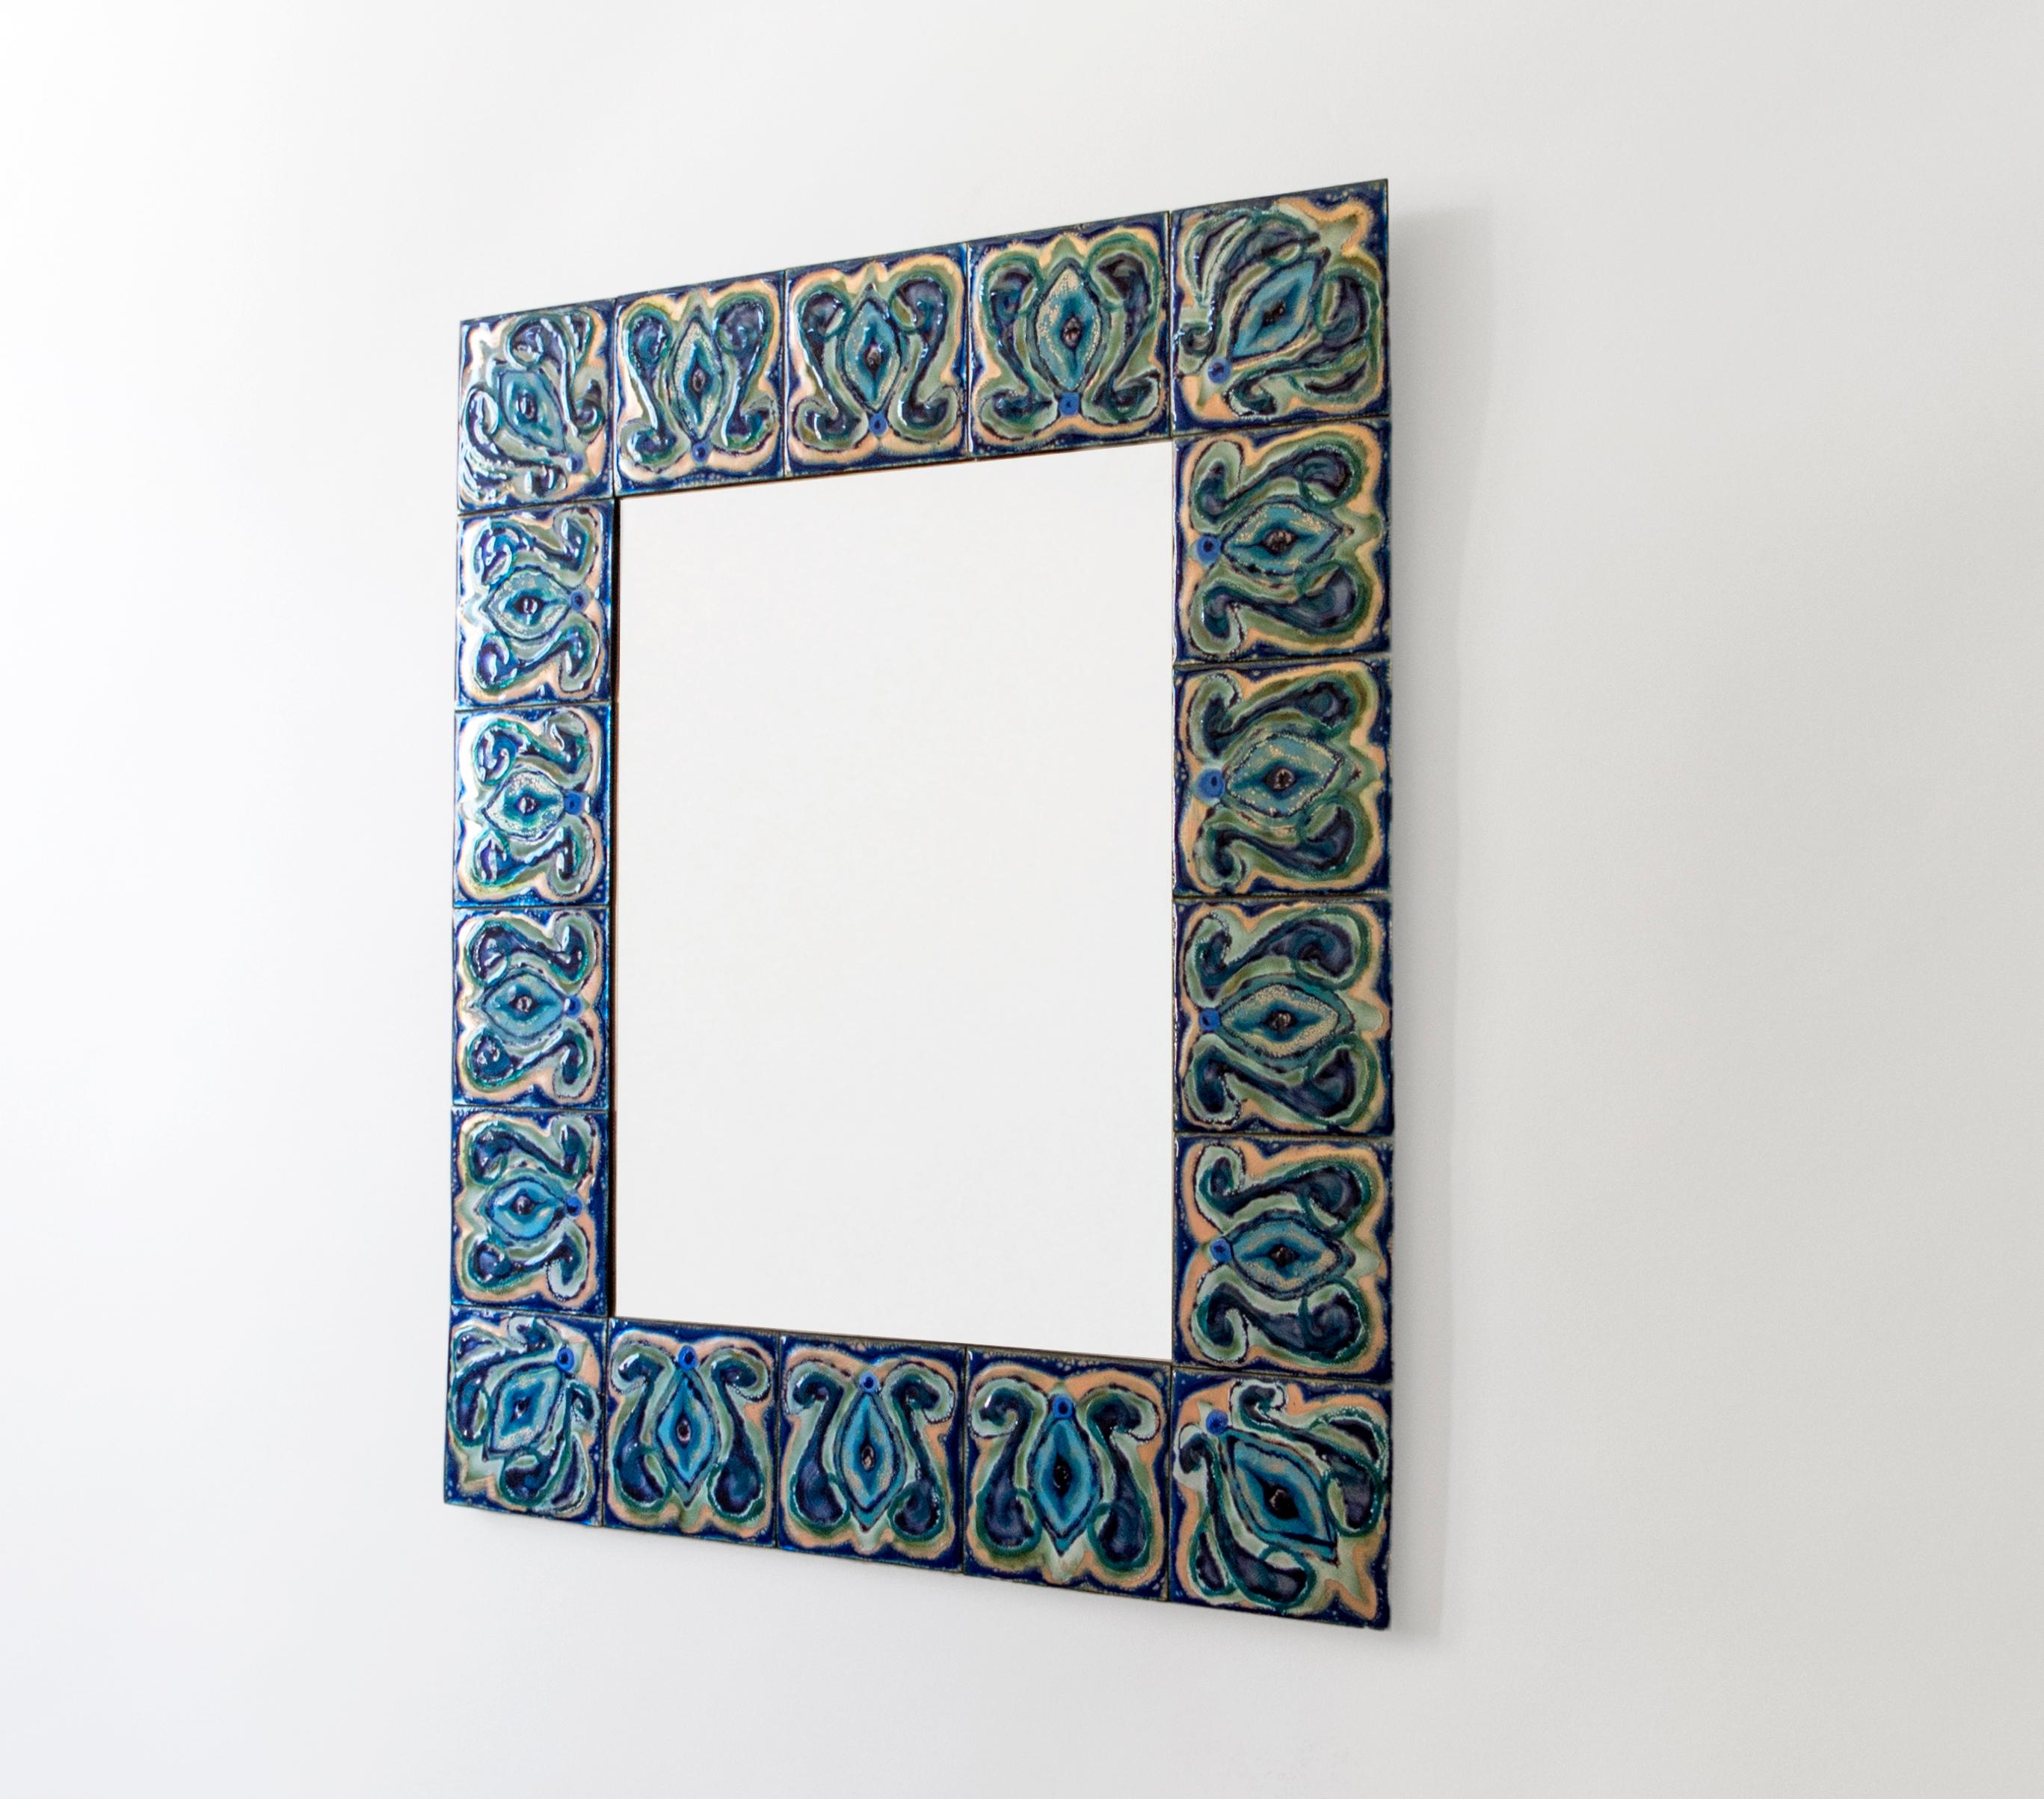 Composed of enameled plates hand-painted by Danish artist Bodil Eje. The repeating pattern displays richly variegated cobalt blue, evergreen, seafoam green, and colorless enamel exposing the copper undersurface, surrounding a colorless rectangular